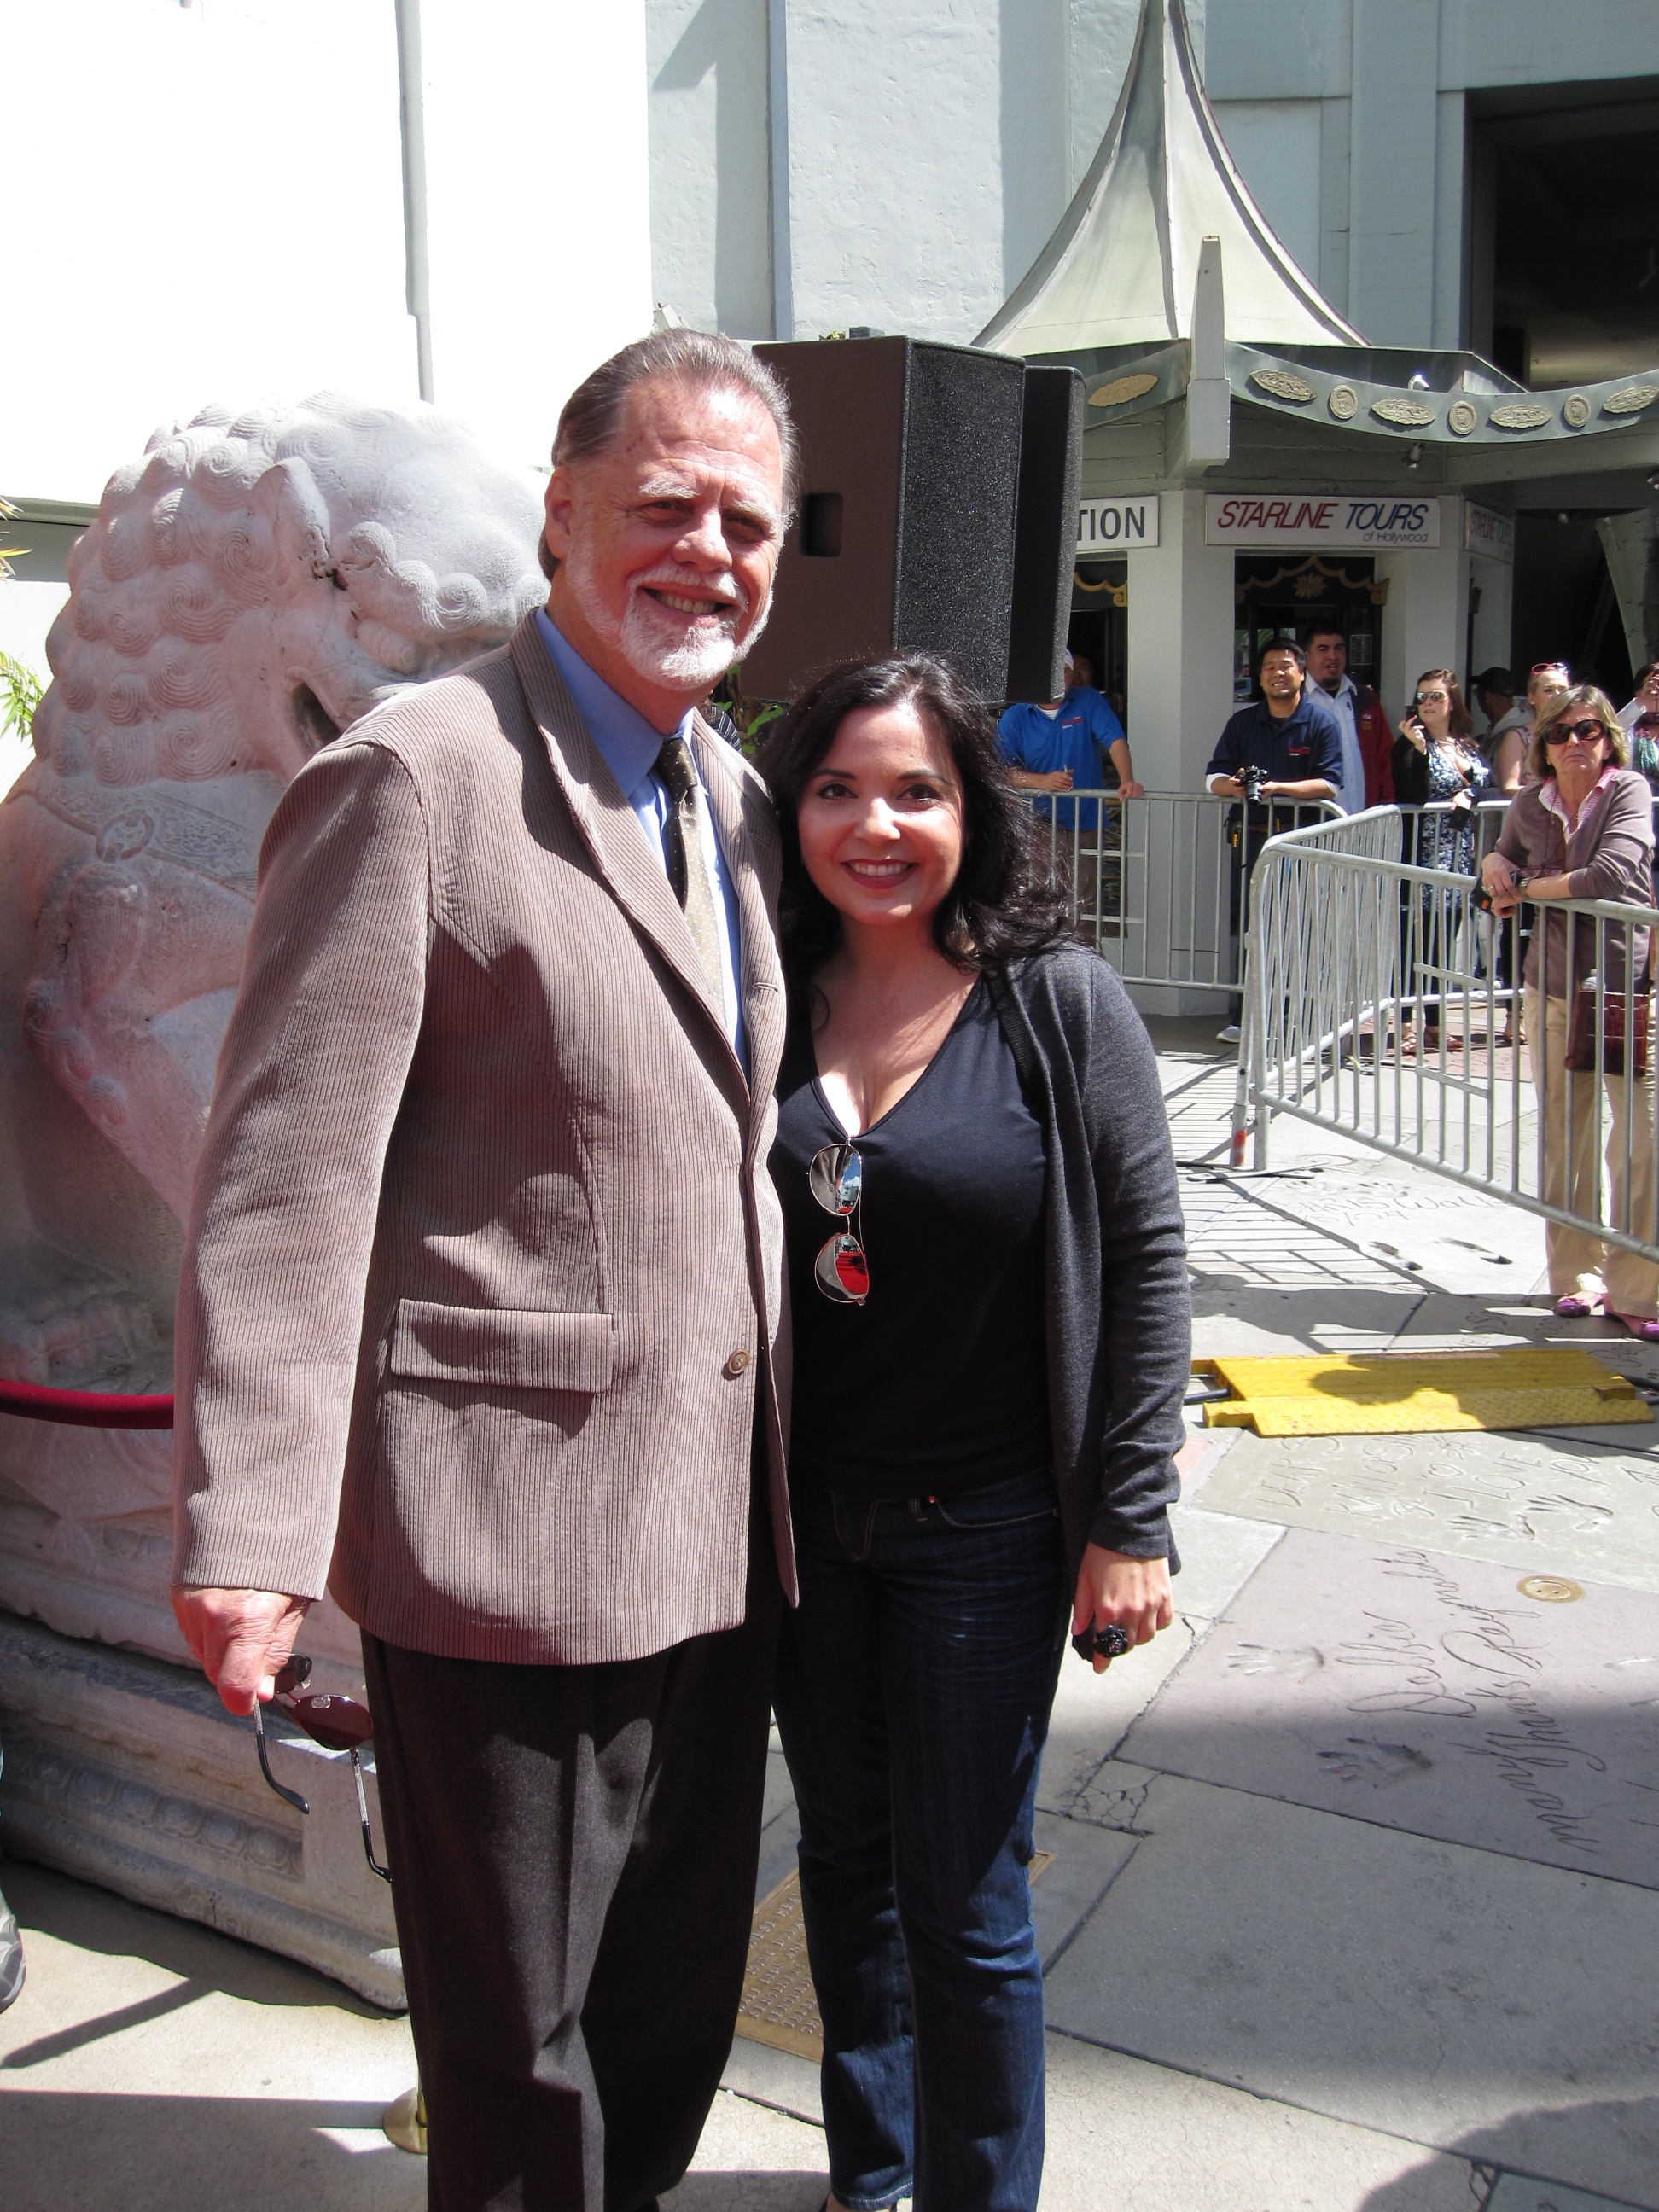 Taylor Hackford and Lori Berlanga: Grauman's Chinese Theatre Foot and Handprint Ceremony for Helen Mirren